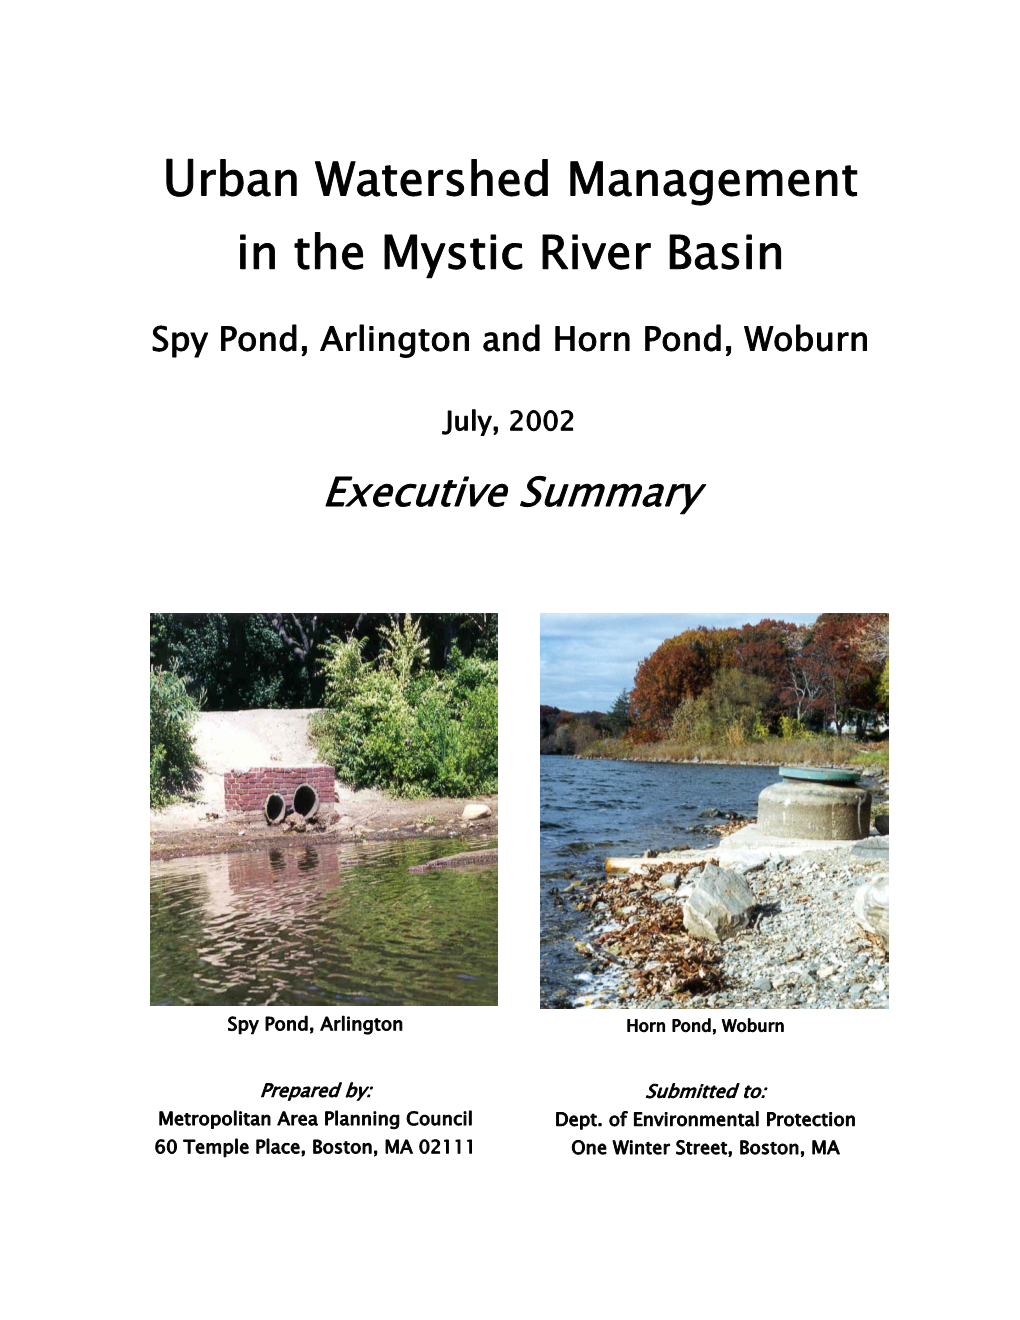 Urban Watershed Management in the Mystic River Basin